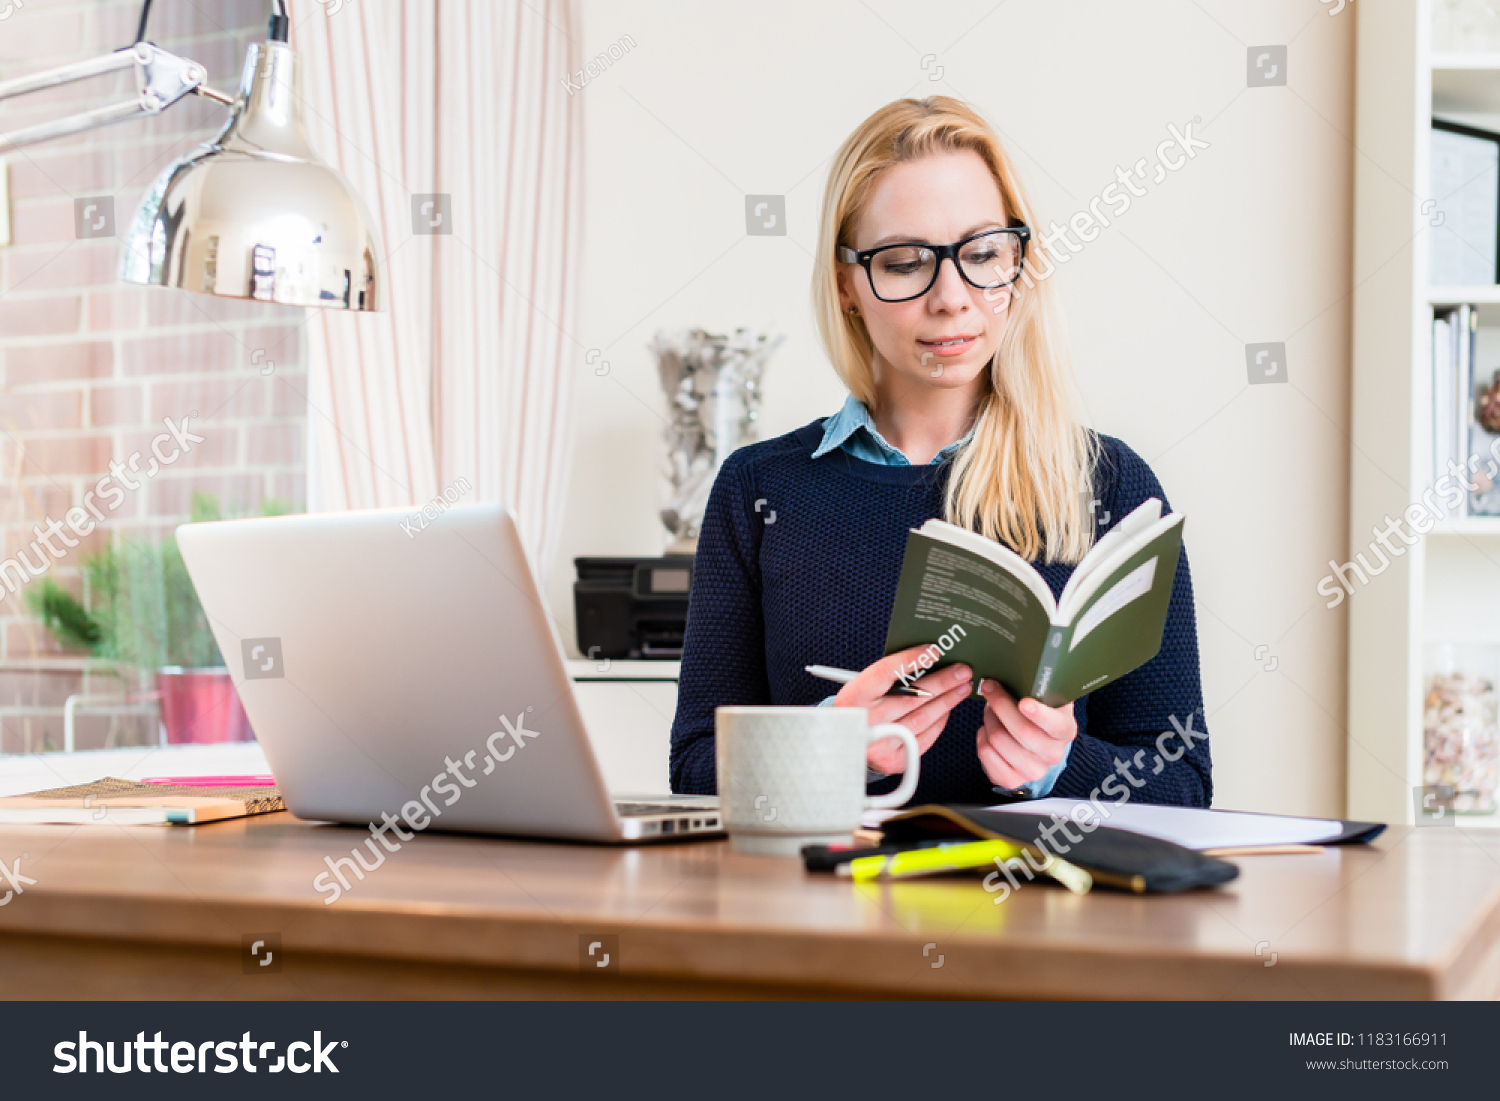 Woman sitting at her desk in office reading book #1183166911